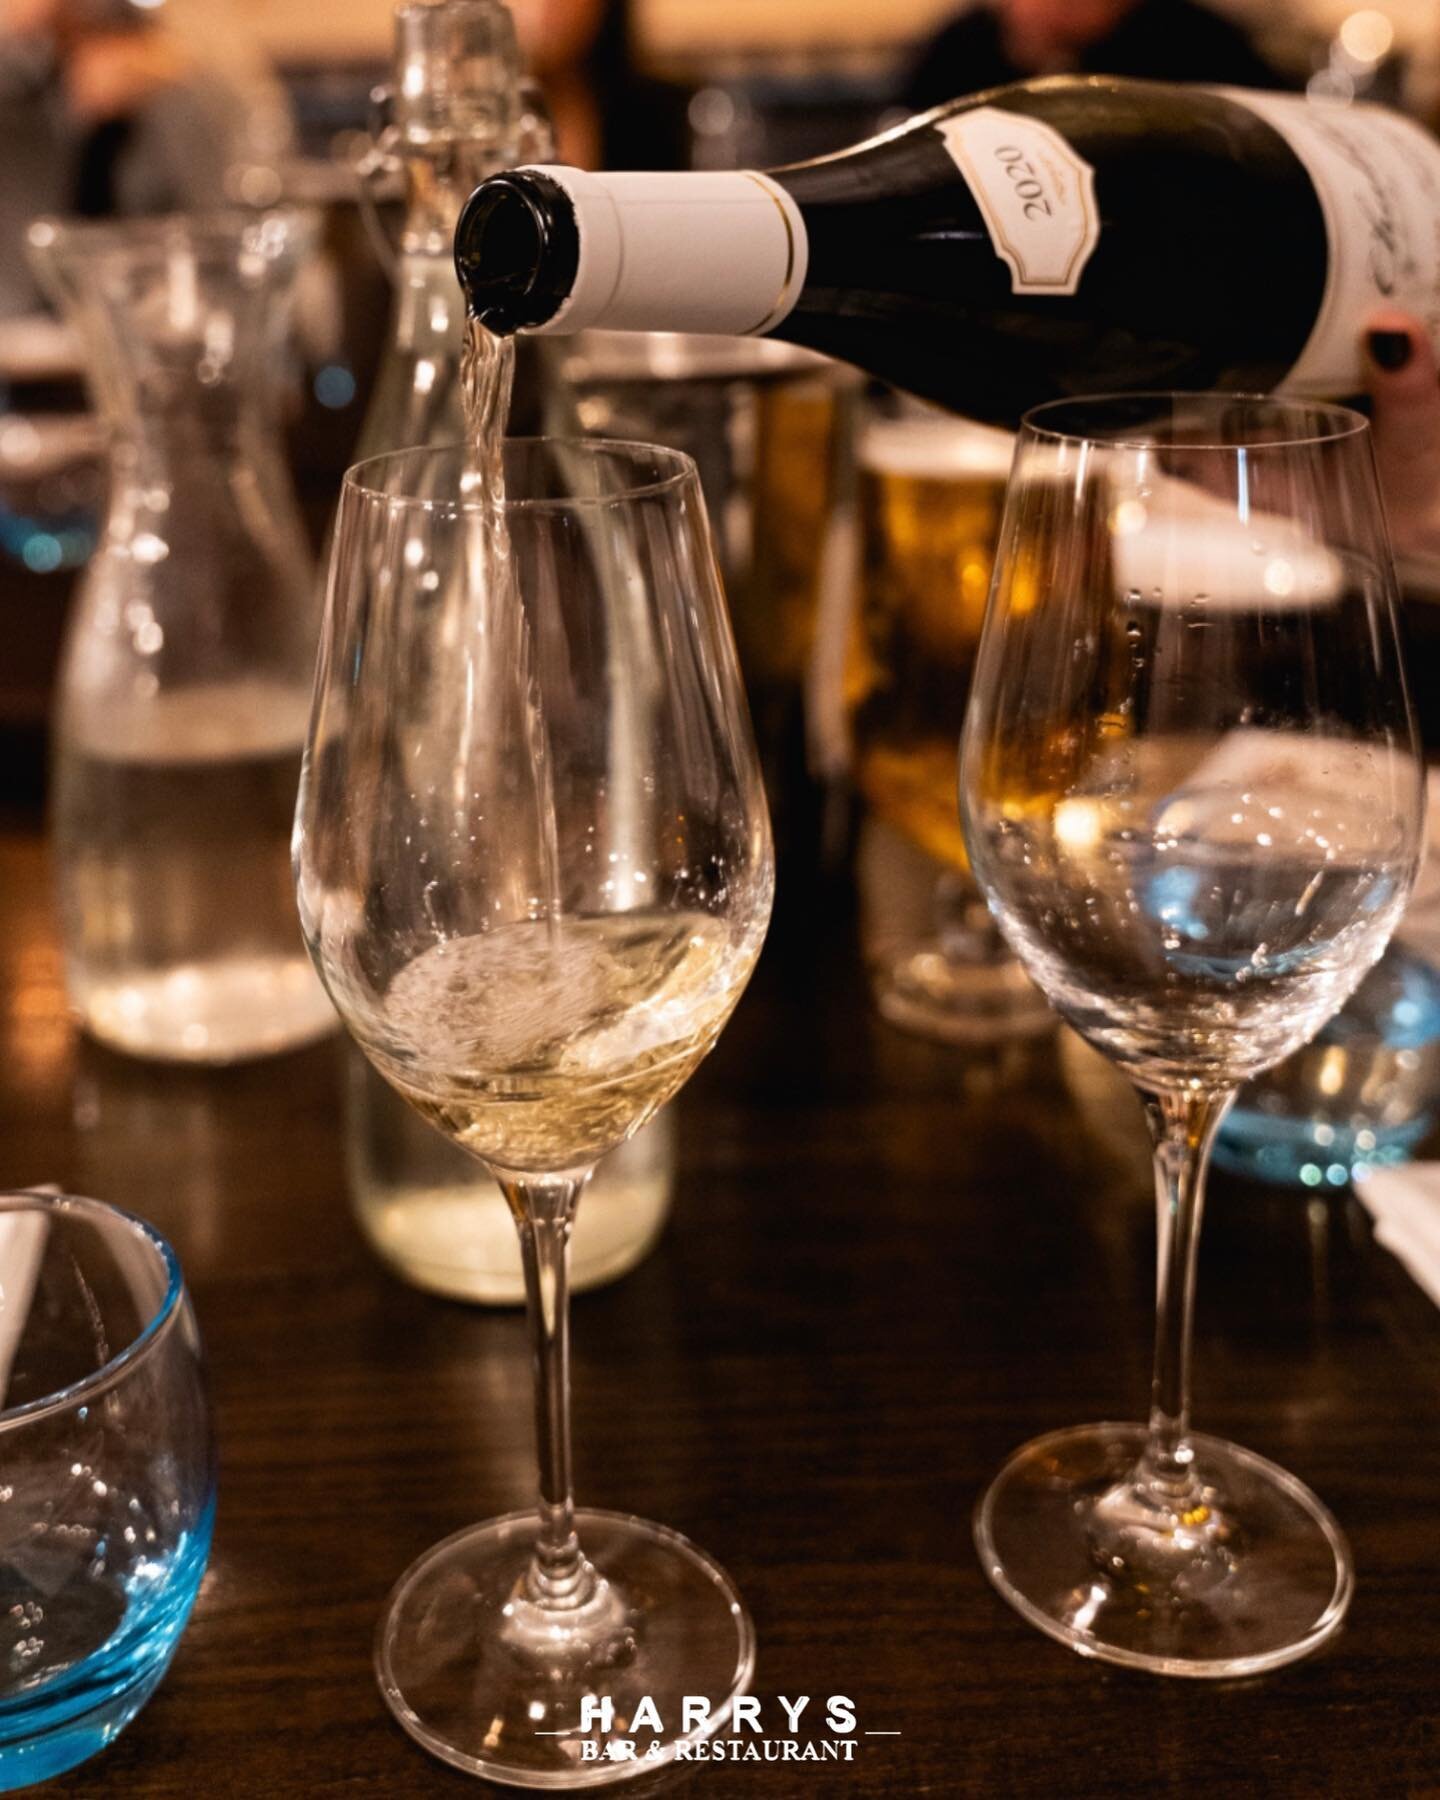 Keep your eyes peeled for the delicious new additions to our wine list 👀 

The staff at Harry&rsquo;s and some of our lovely regulars have had the tough job of wine tasting to help perfect our list on offer 🍷